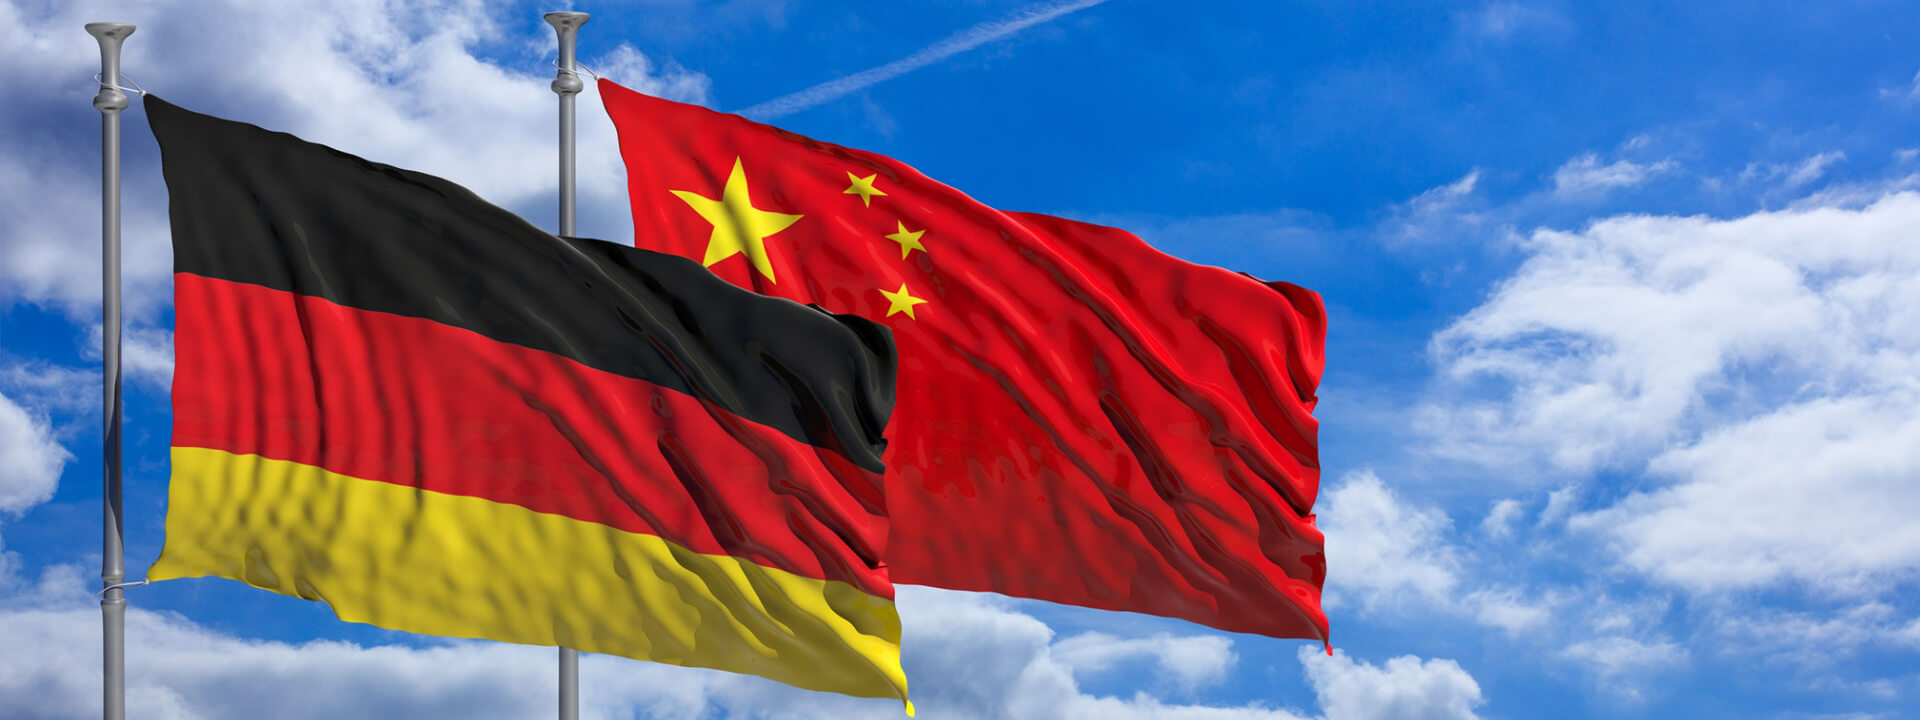 Chinese Premier and German Chancellor Agree on Supply Chain Stability